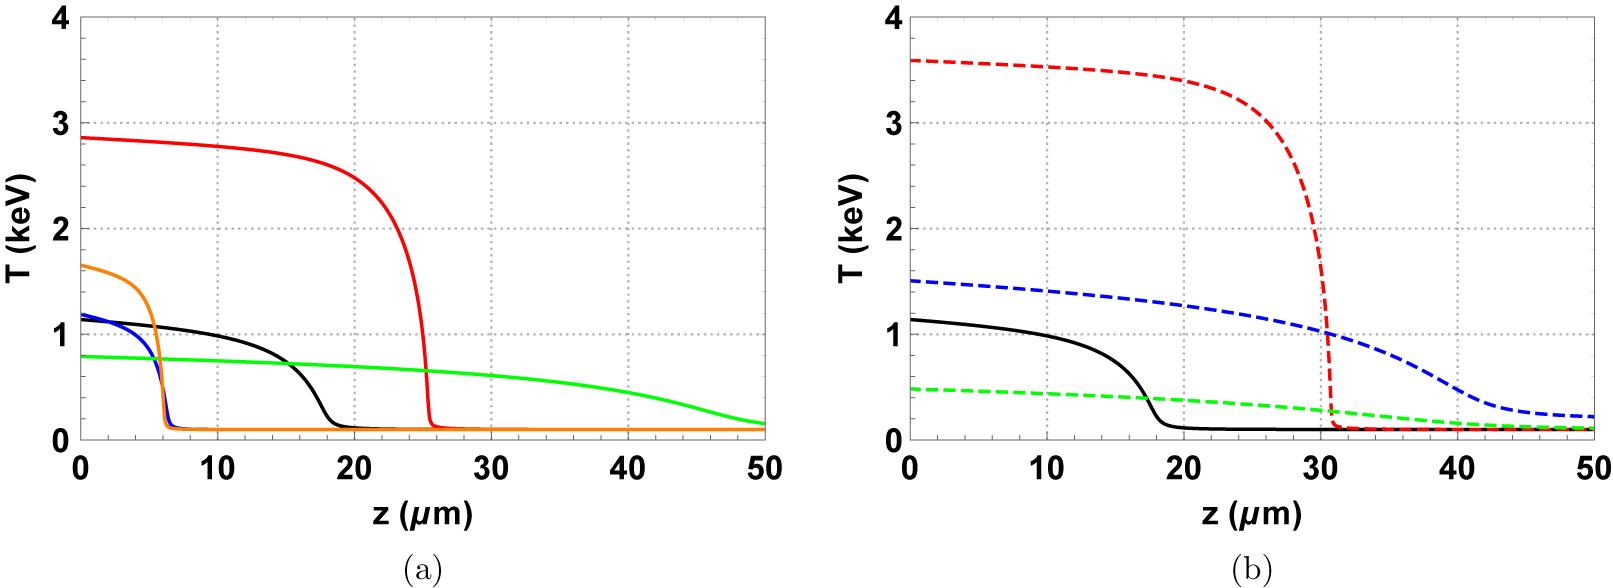 The temperature of plasma versus laser propagation depth inside plasma for the incident planar flat-top RHCP laser with duration of 1 ns except for the red solid curve of 10 ns. Parameters of the two identical black curves in (a) and (b): laser wavelength of , intensity of , duration of ns, plasma density of , initial plasma temperature of keV and magnetic field of T. Each of the other six colourful curves has one of the above parameters being changed, that is, (a) ns (red, solid), (blue, solid), T (green, solid) and T (orange, solid); (b) (red, dotted), eV (blue, dotted) and (green, dotted).